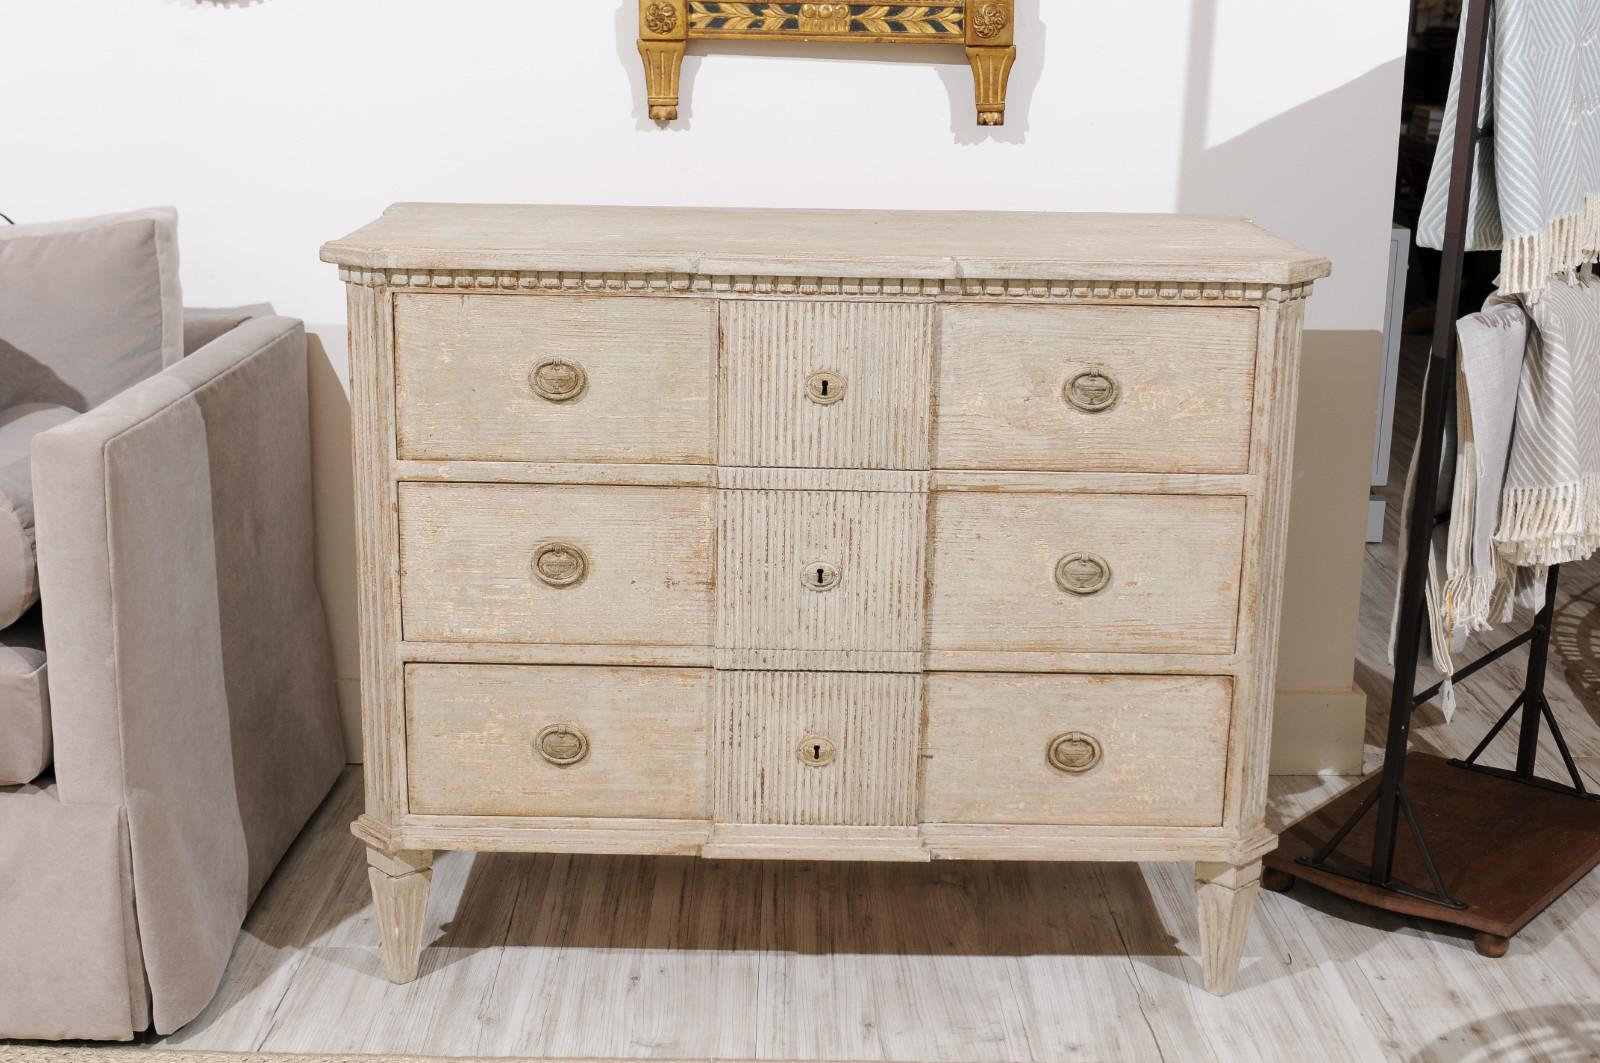 Italian neoclassical style grey painted pine three-drawer commode from the early 20th century, with dentil molding, canted fluted side posts and feet and reeded motifs. Newly constructed in Italy from old pine, this beautifully crafted neoclassical